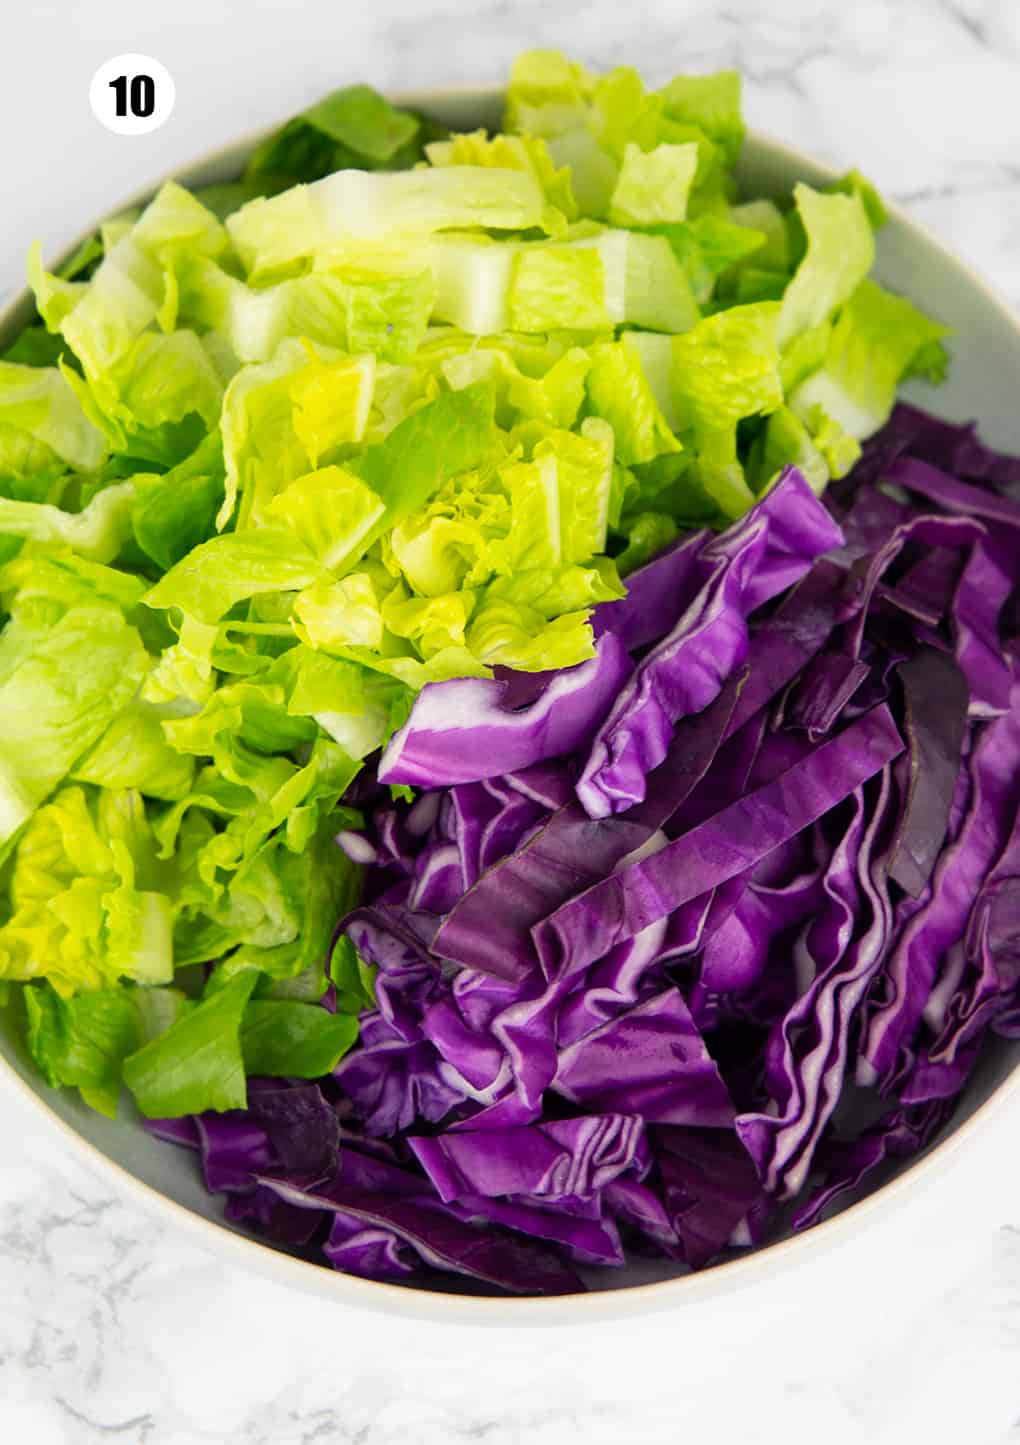 a bowl filled with chopped lettuce and red cabbage on a marble countertop